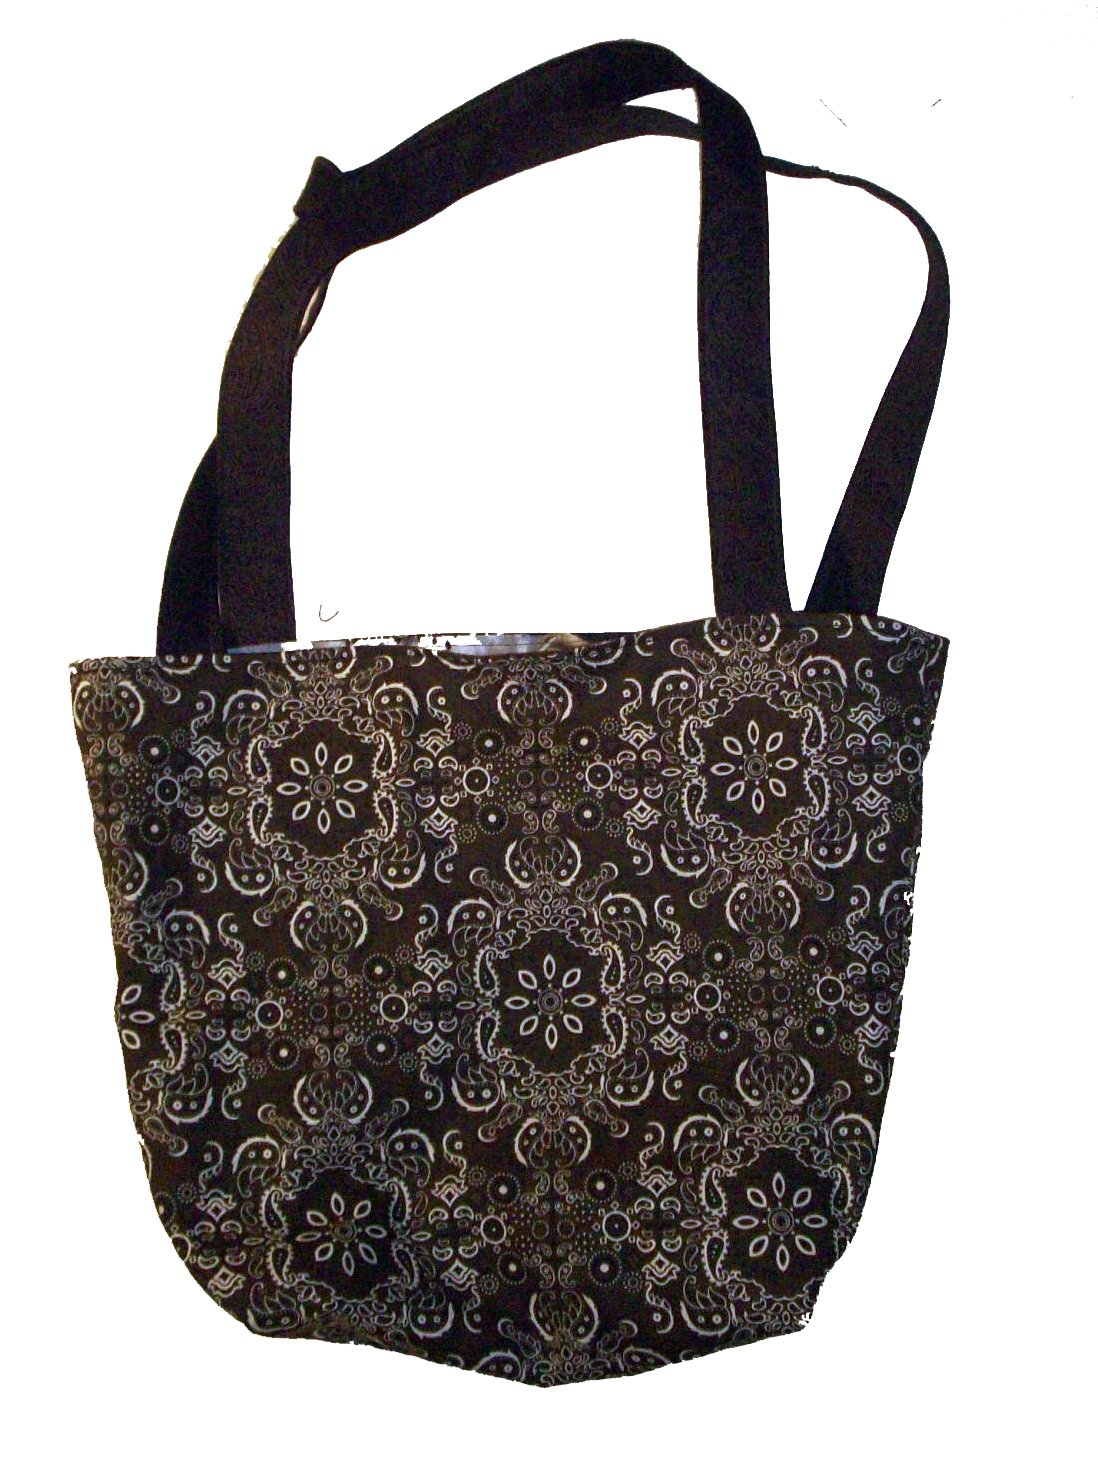 ... TOTE Bag Sewing Pattern - Simple to make!!! Bag with handles